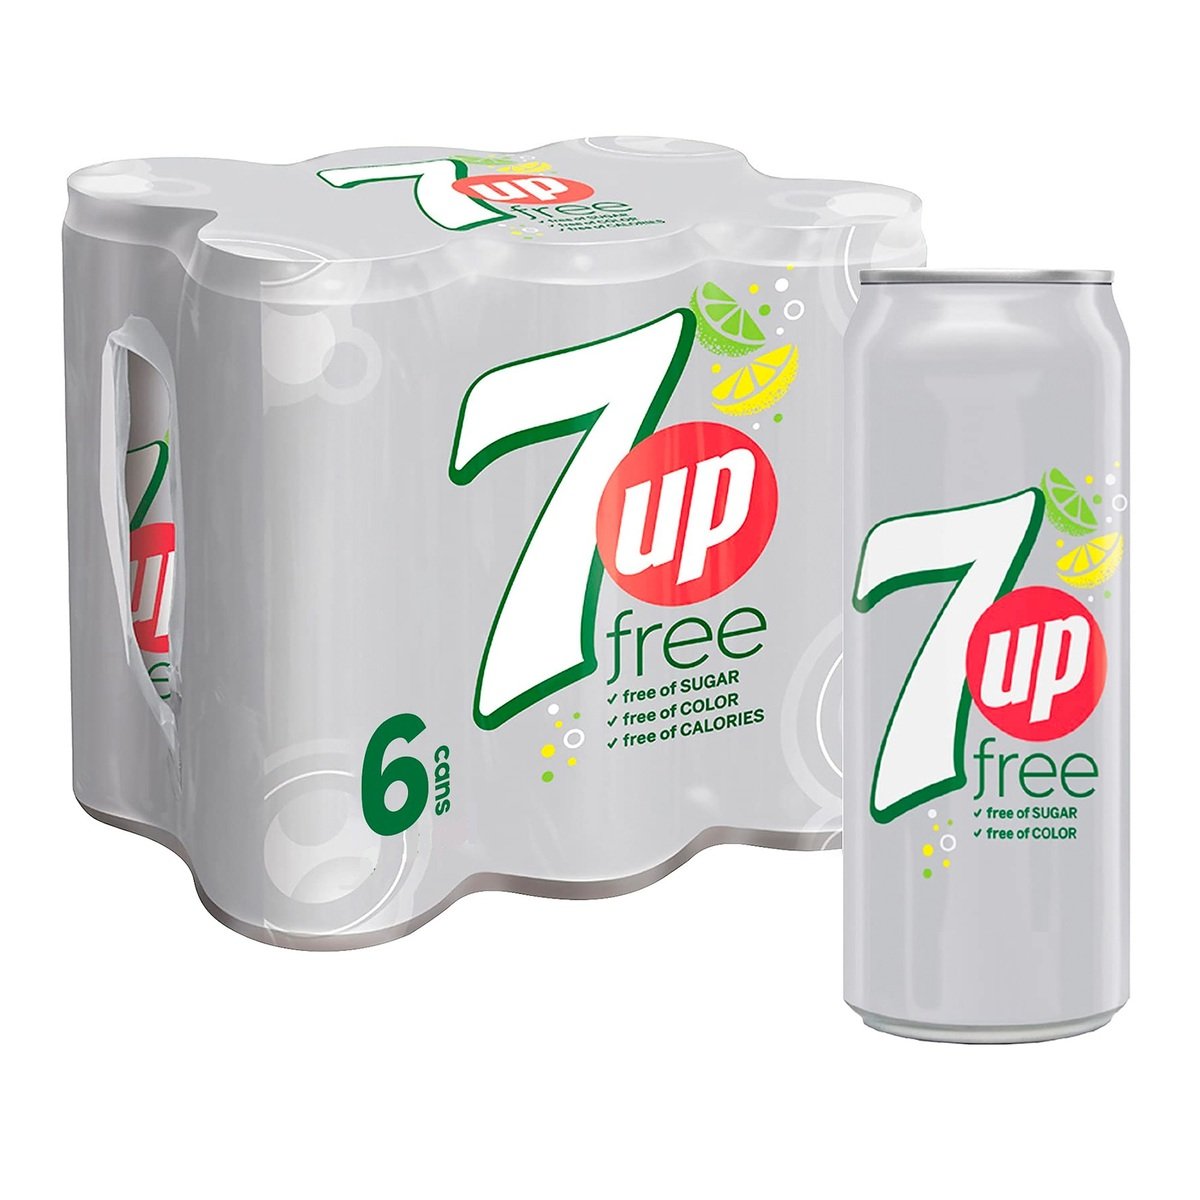 7 Up Diet Can 30 x 250 ml